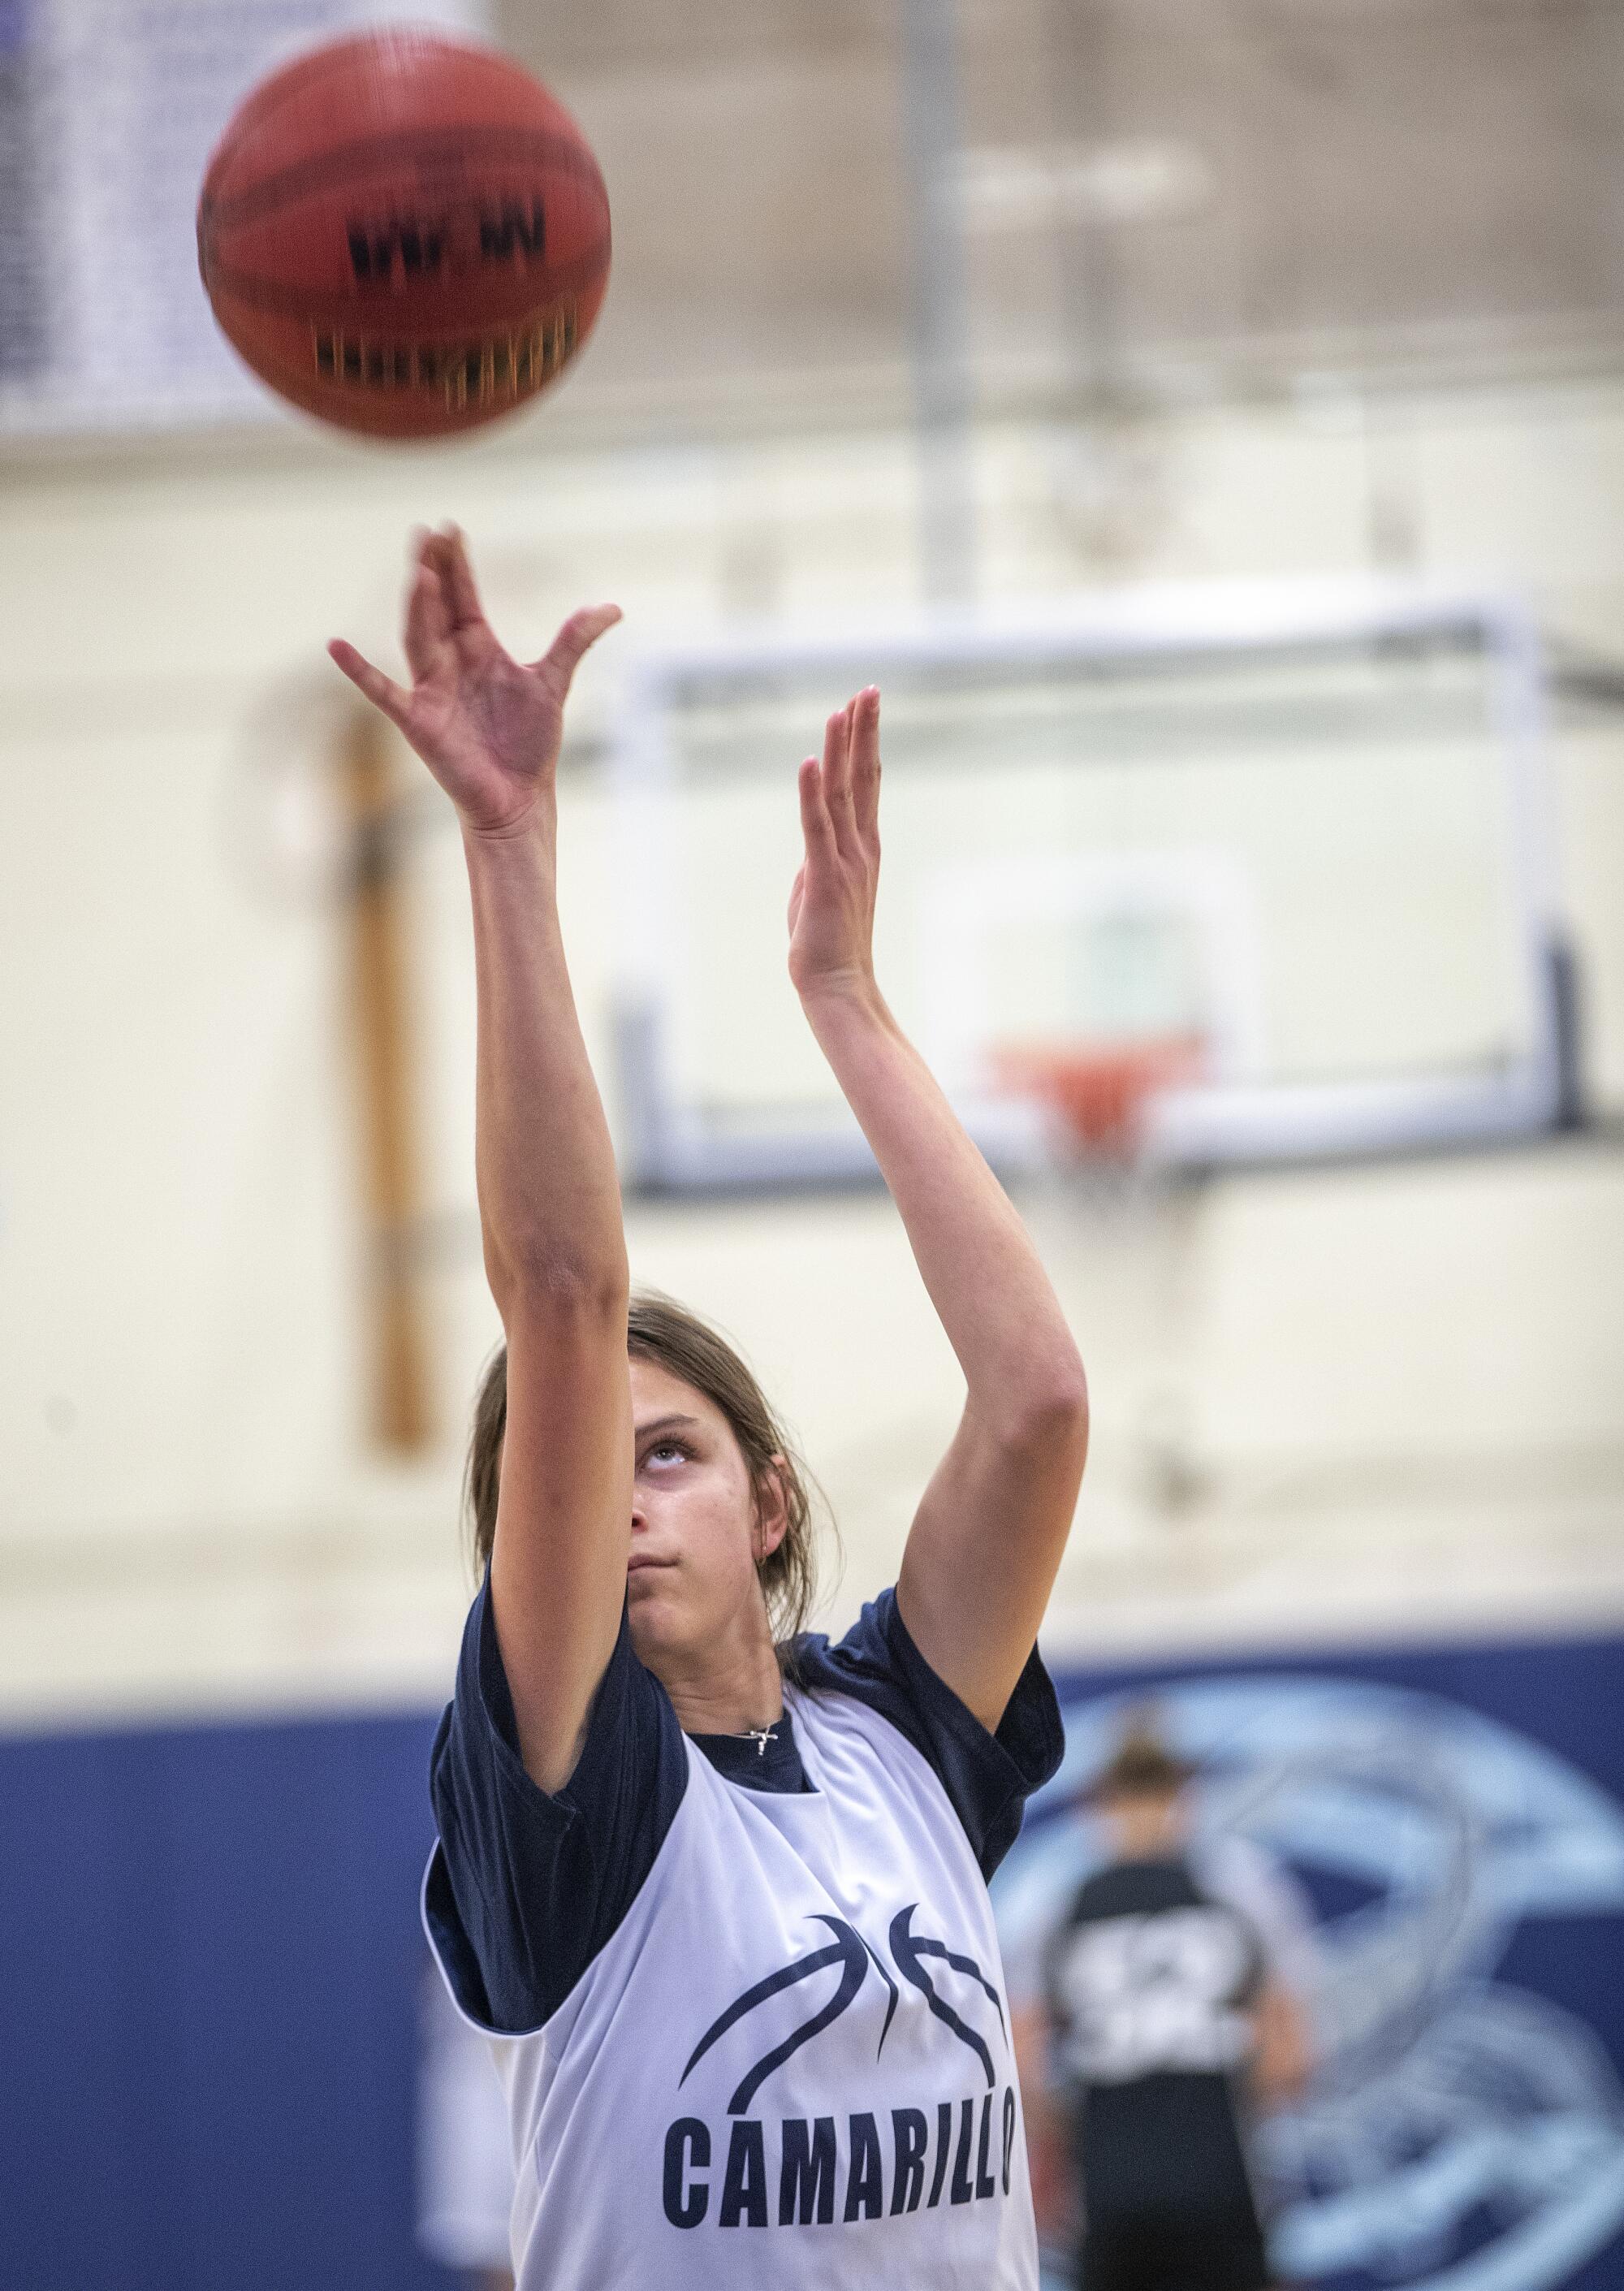 Gabriela Jaquez releases a shot during a free-throw shooting drill.